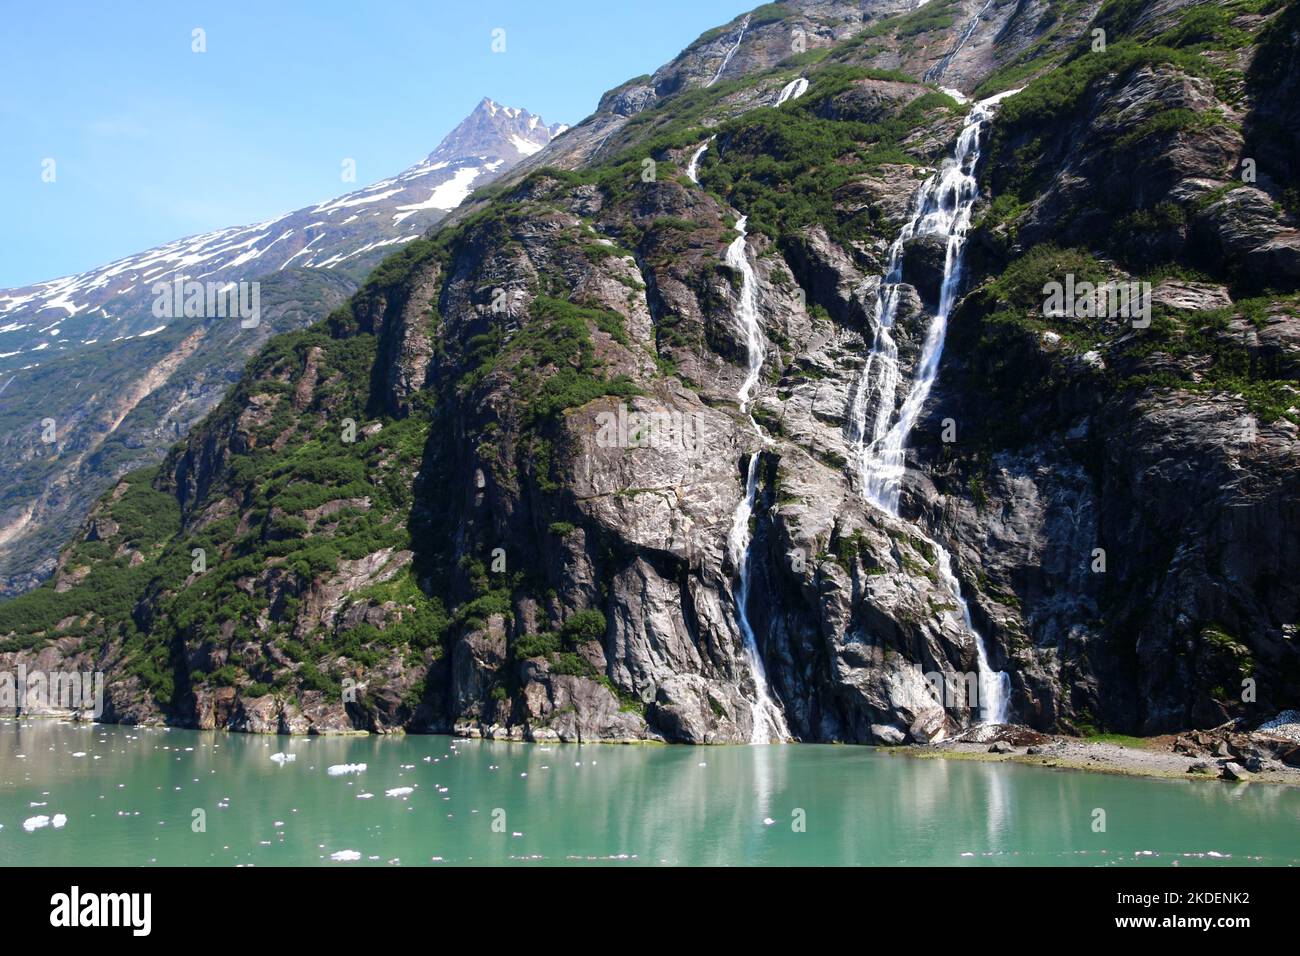 Waterfall in the Tracy Arm inlet in the Boundary Ranges of Alaska, United States Stock Photo